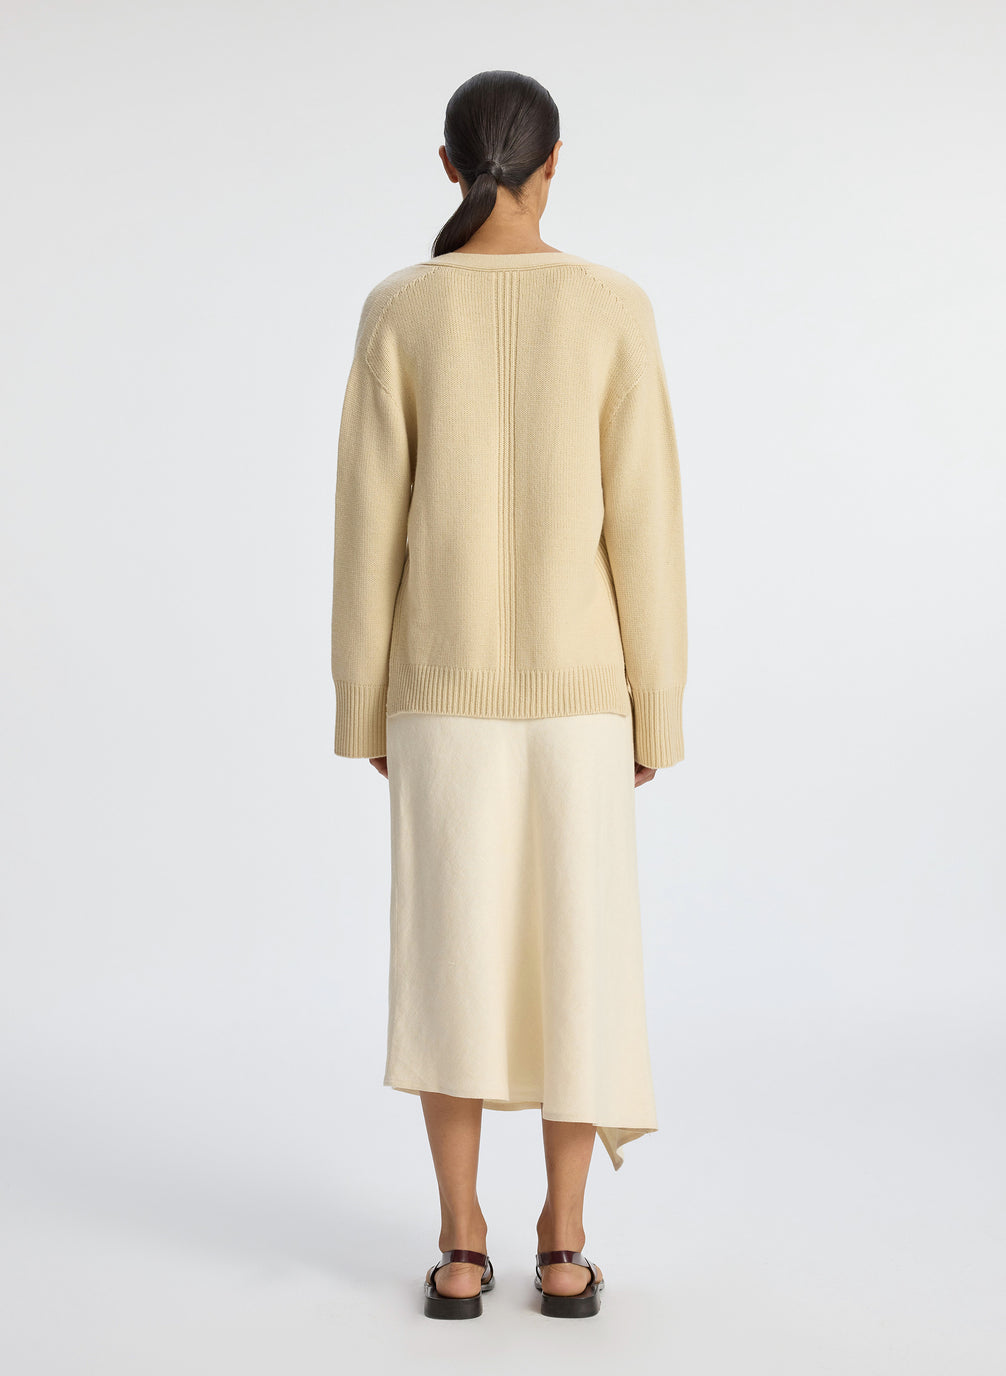 back view of woman wearing beige v neck sweater and cream skirt